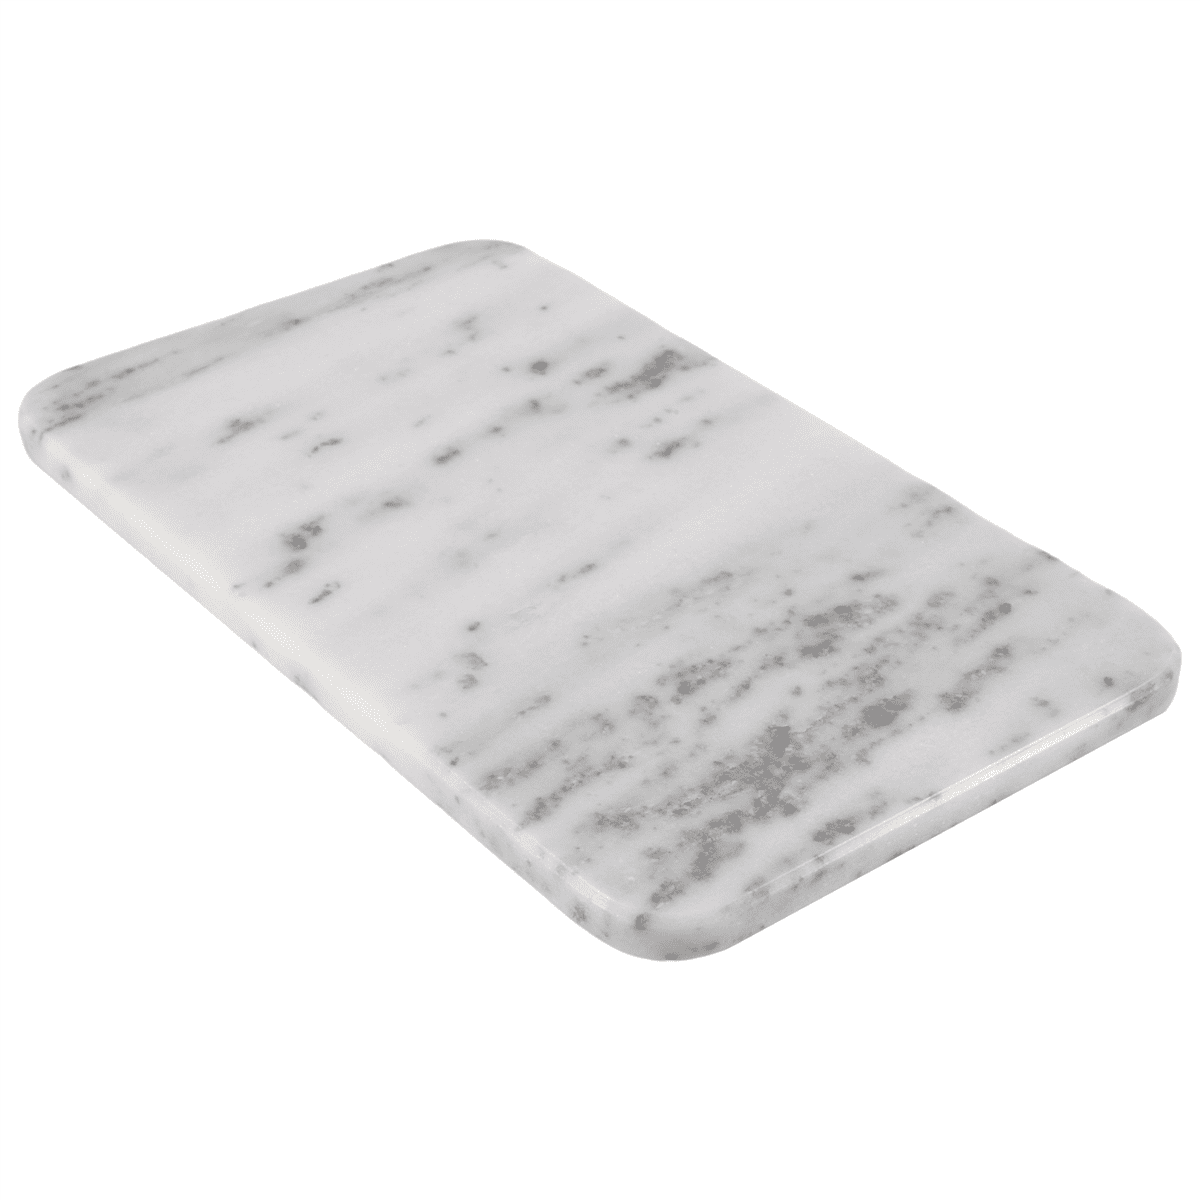 Stone Drying Mat for Kitchen Counter, Super Absorbent, Heat Resistant Dish  F7R4